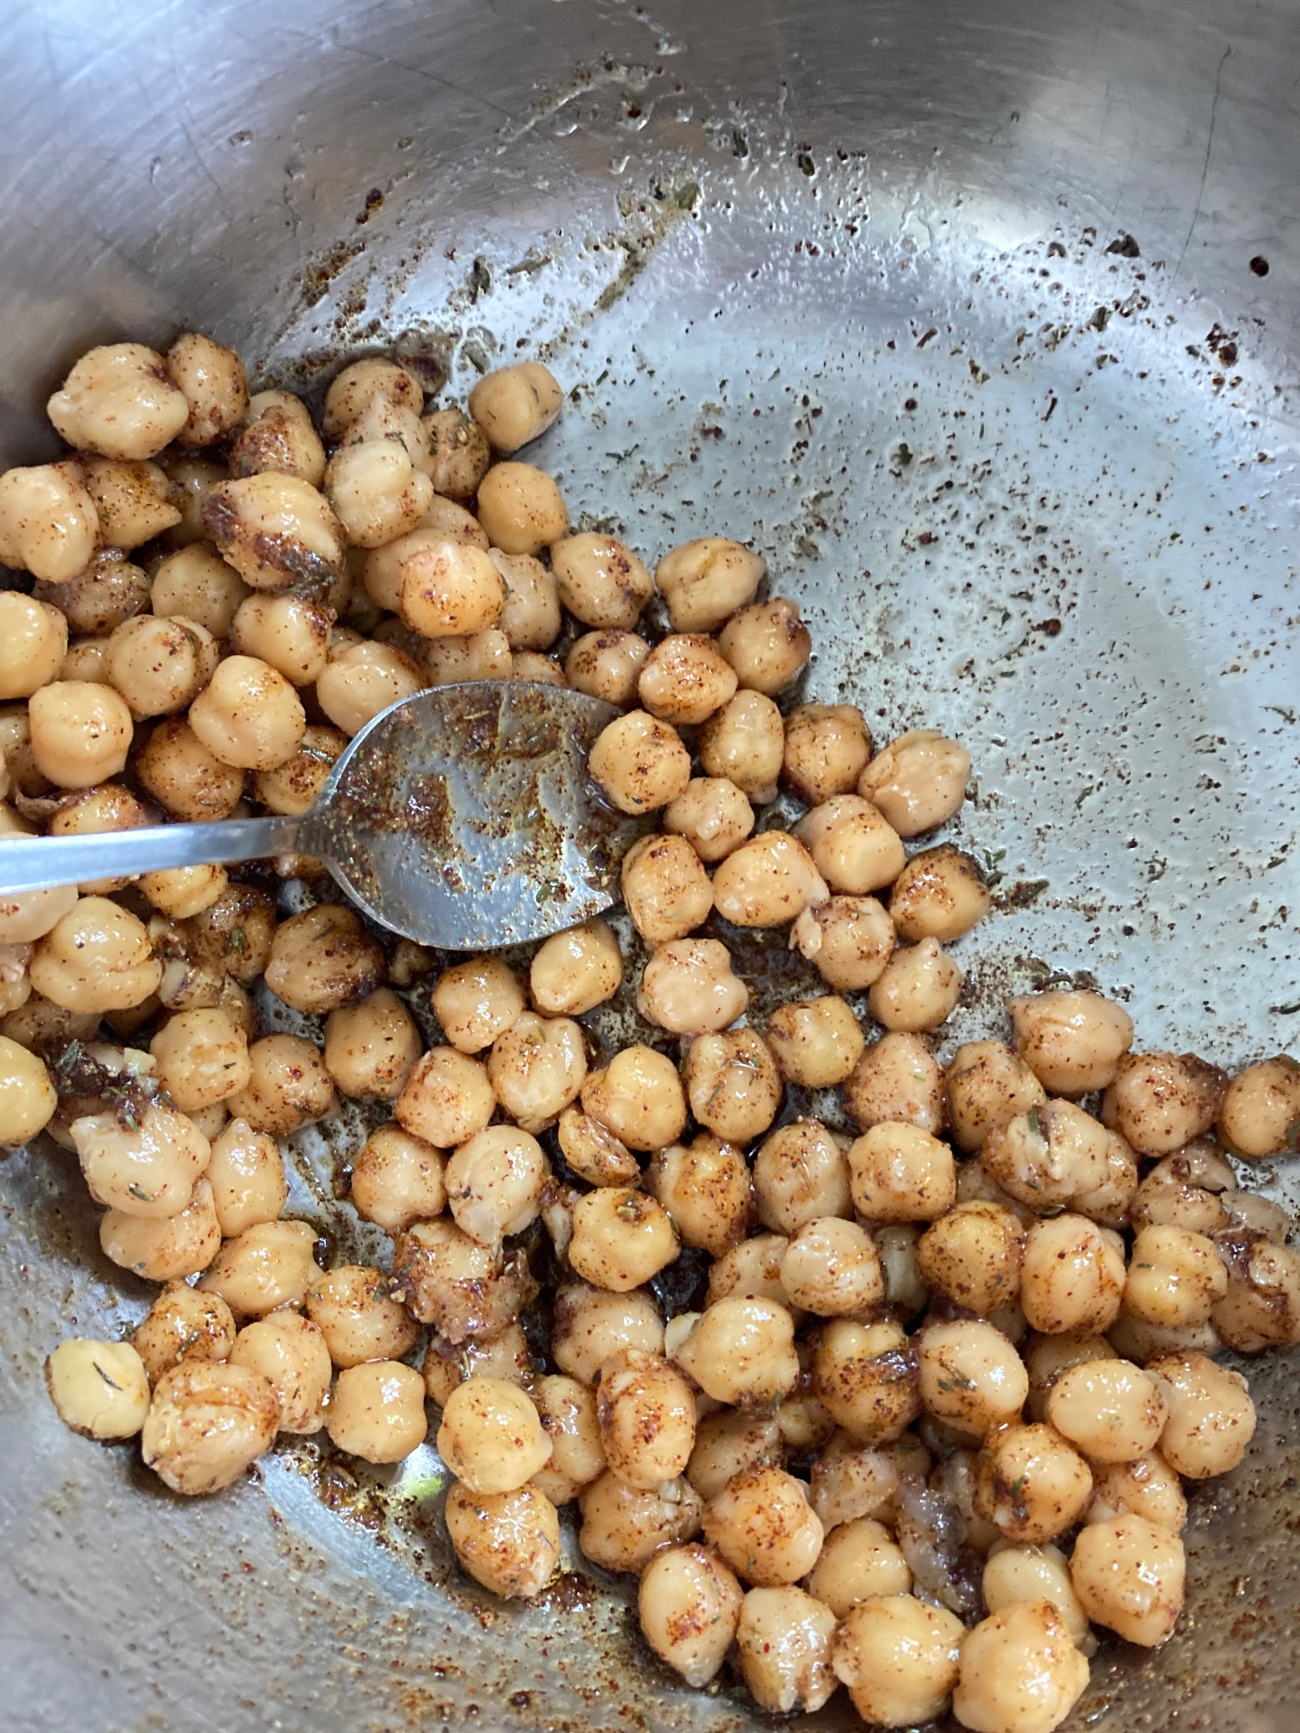 Preheat oven to 400˚F. Drain chickpea dry then pat with paper towel to finish drying. Combine all ingredients into a large bowl. Toss to fully coat each chickpea.